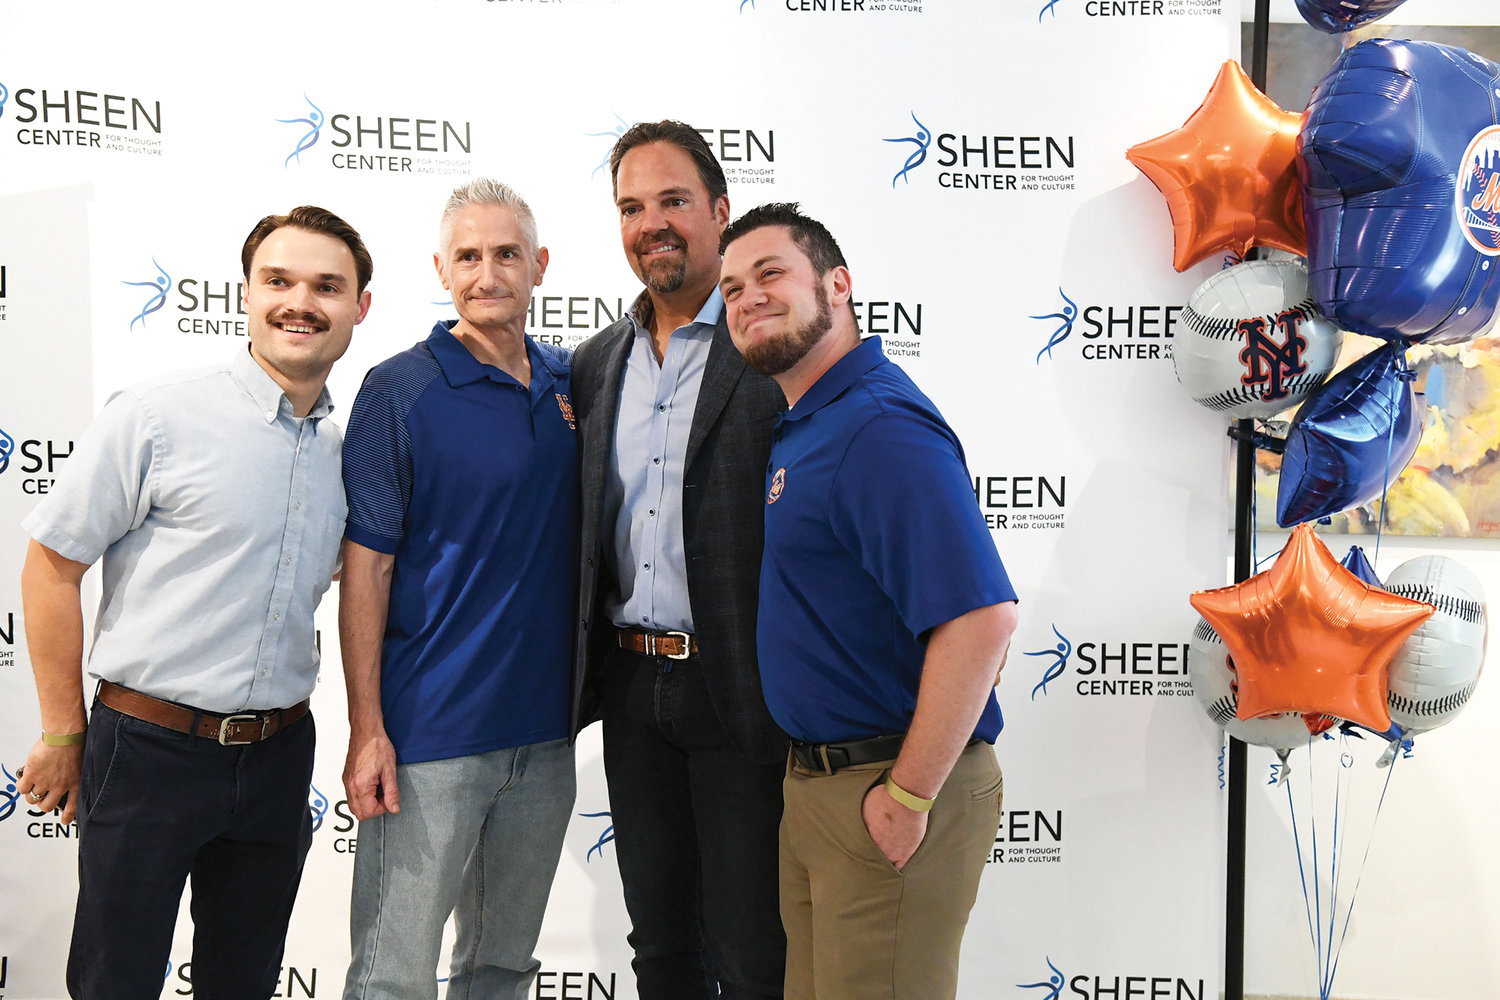 Christian Murphy, Freddie Franza and Joe Franza join Piazza during a meet and greet before the “Faith: The Competitive Edge” series July 26 at The Sheen Center’s Loreto Theater in Manhattan.